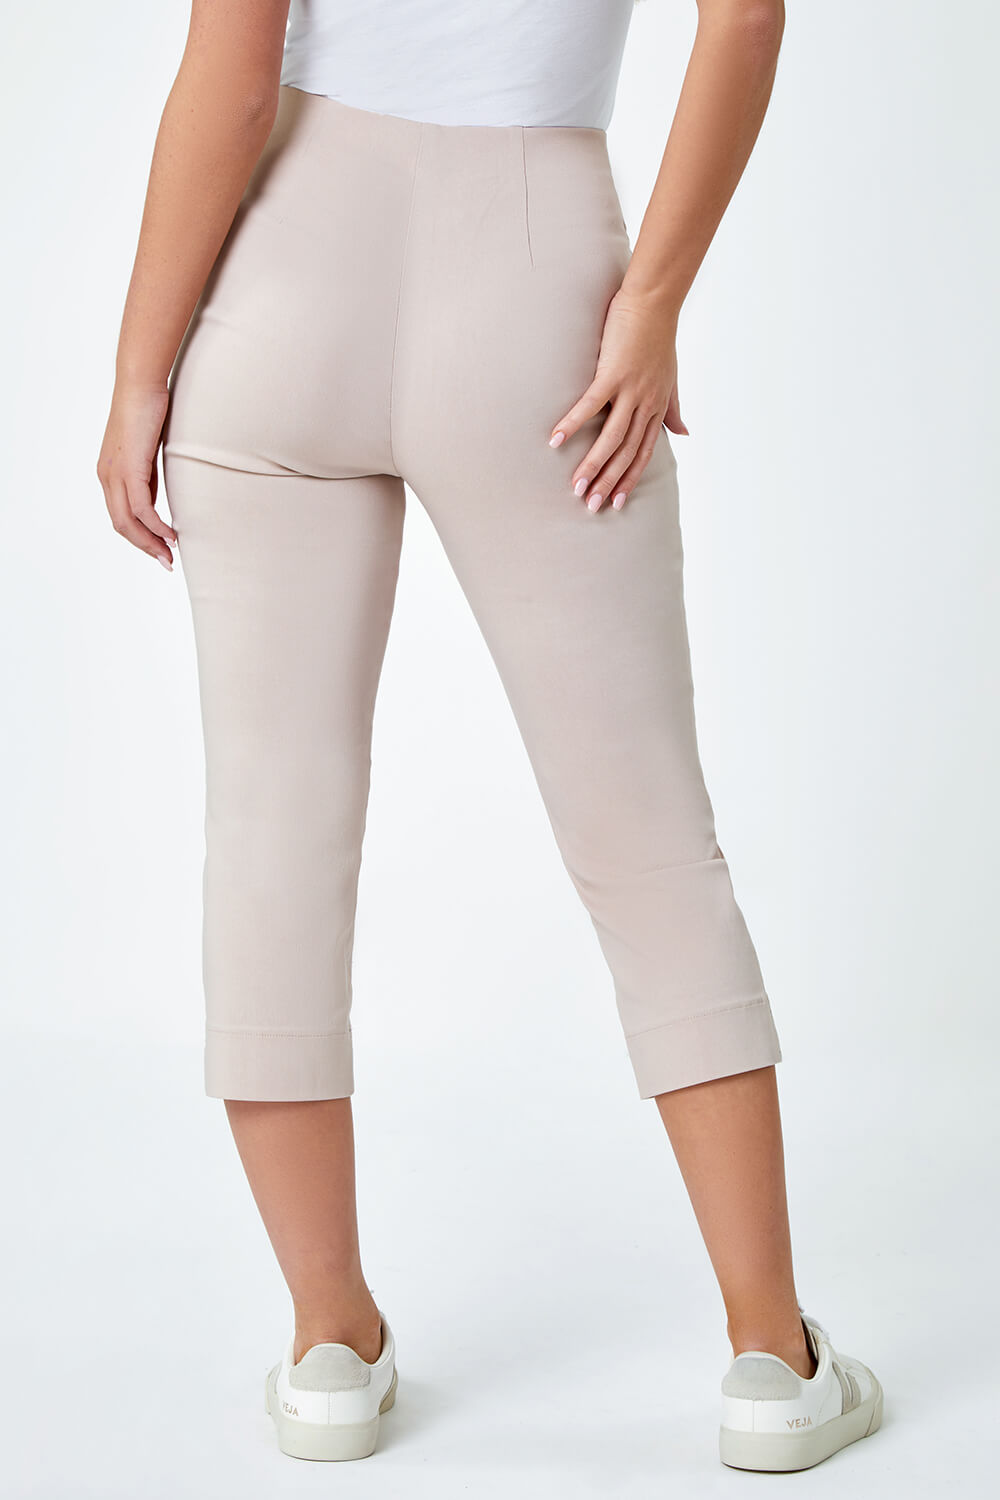 Stone Petite Cropped Stretch Trousers, Image 3 of 5